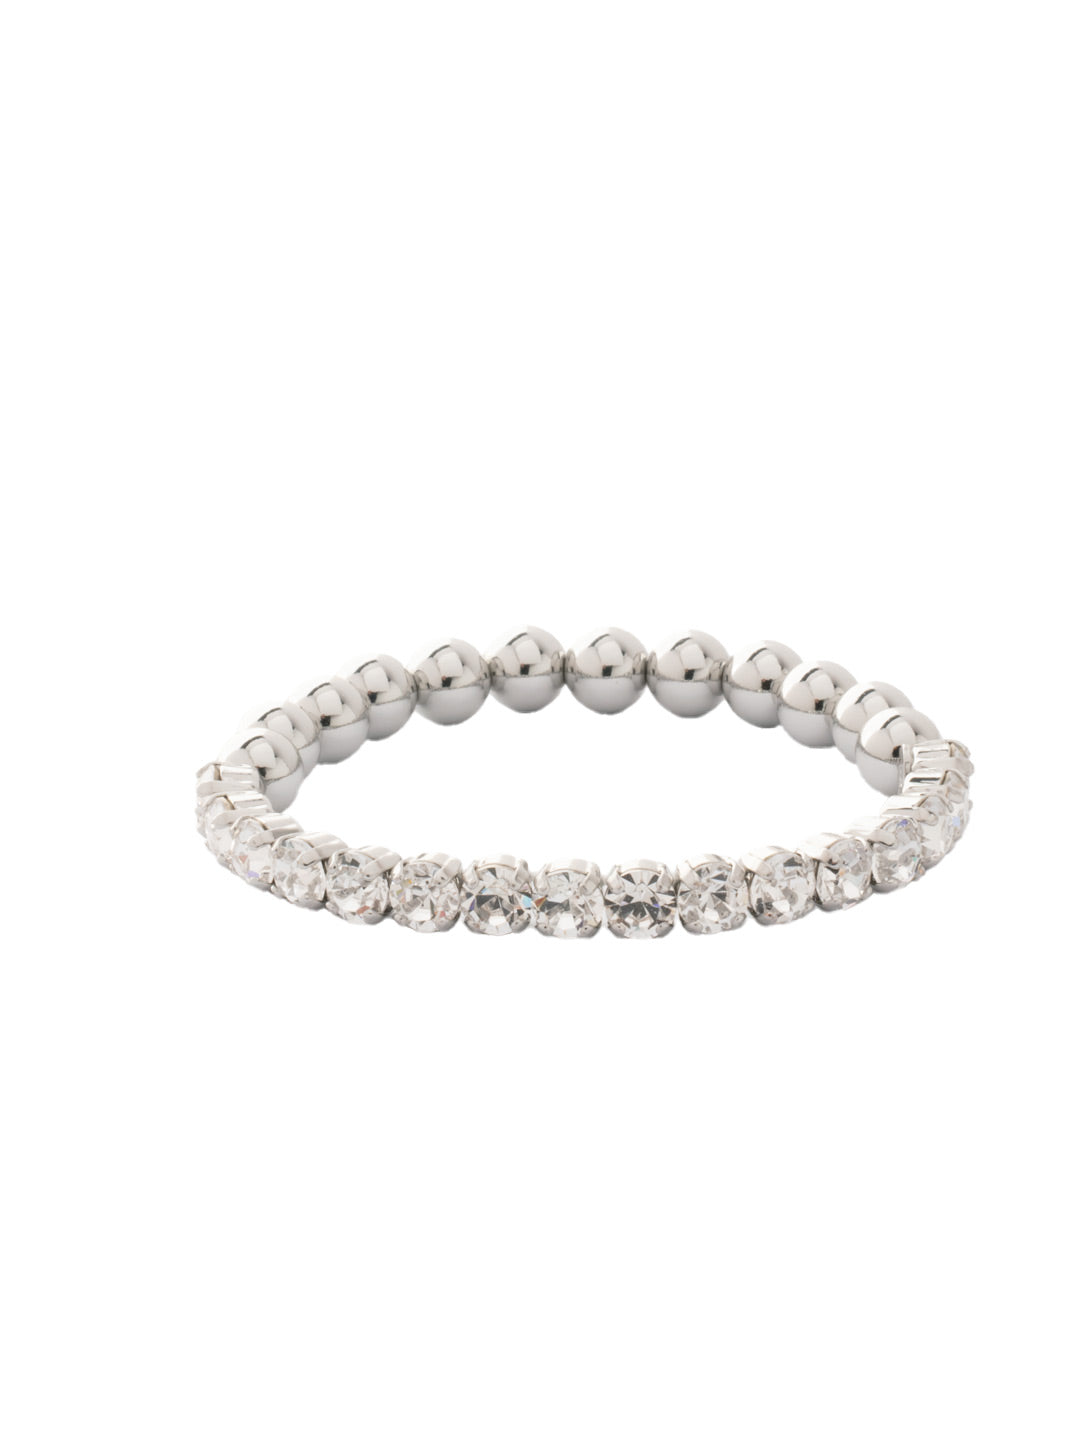 Mini Crystal Zola Stretch Bracelet - 4BFL5PDCRY - <p>The Mini Crystal Zola Stretch Bracelet features half mini crystals and half beaded balls on a sturdy jewelers' filament, stretching to fit most wrists comfortably, without the hassle of a clasp! From Sorrelli's Crystal collection in our Palladium finish.</p>